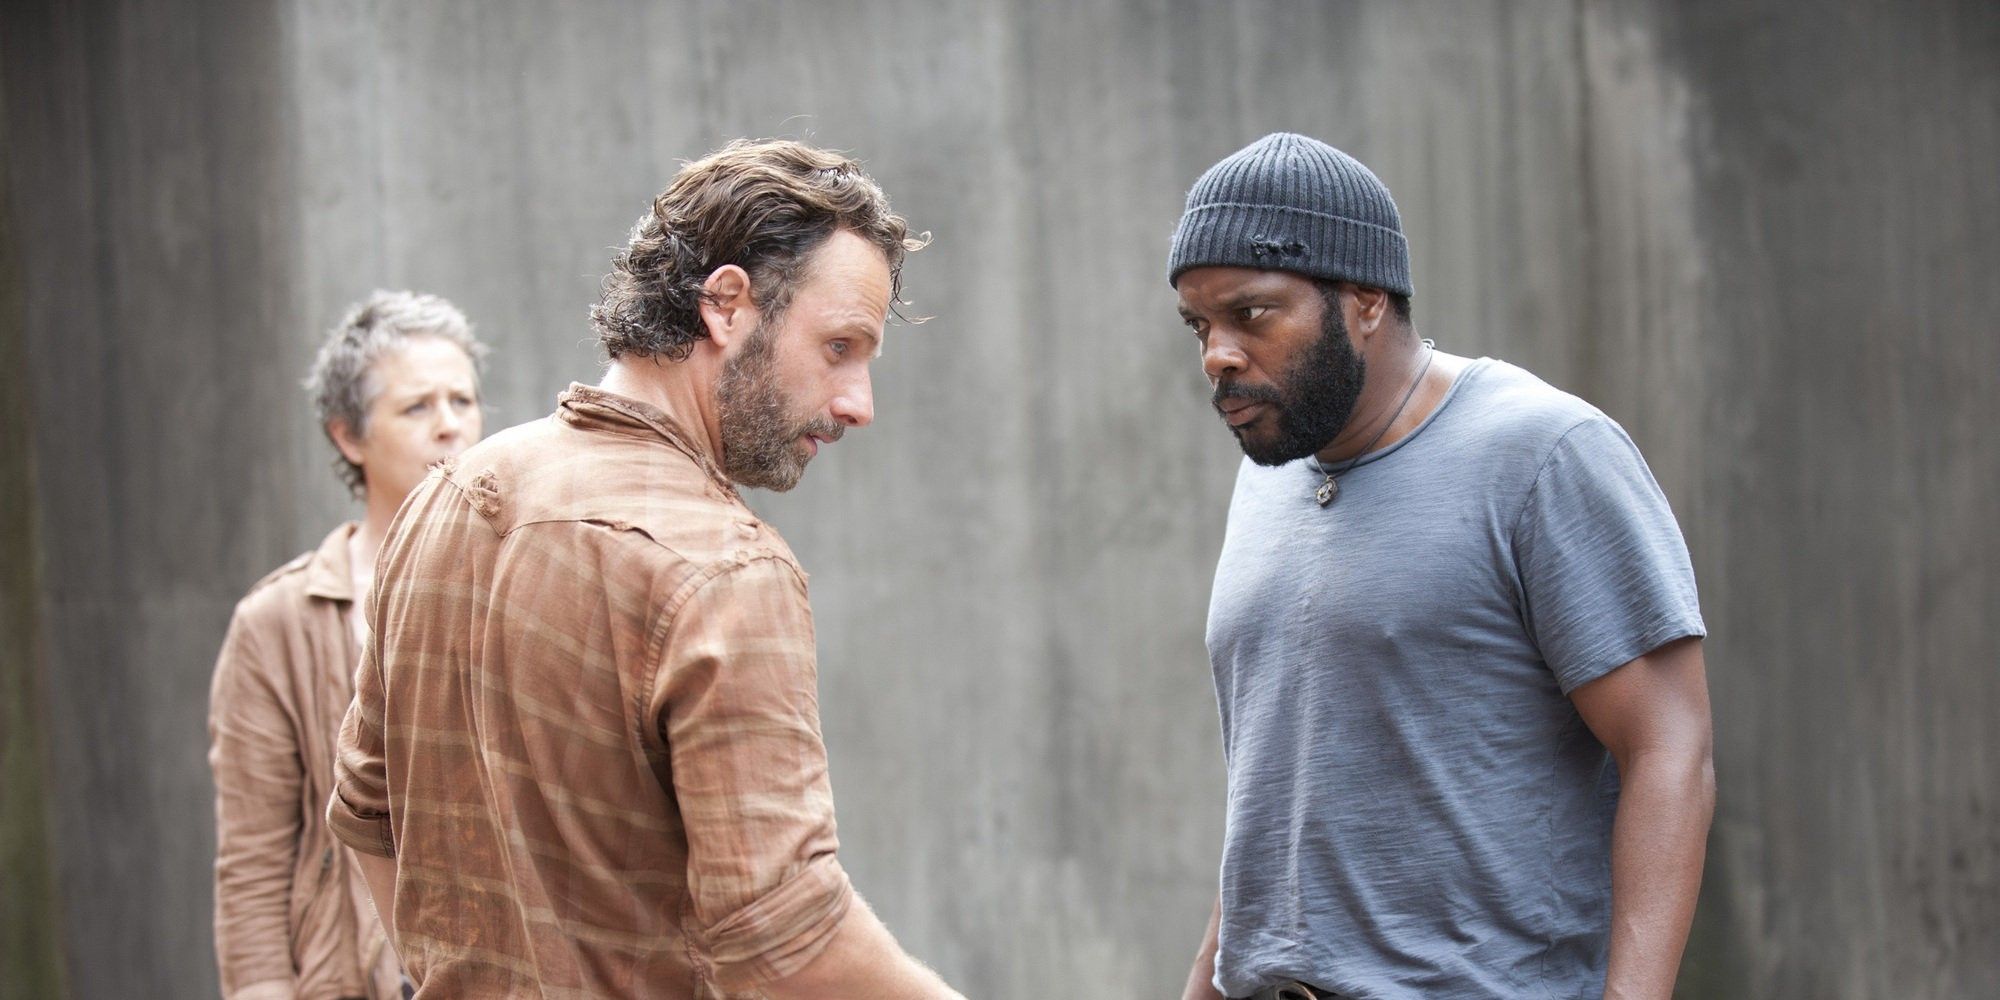 Melissa McBride as Carol, Andrew Lincoln as Rick and Chad Coleman as Tyreese in The Walking Dead